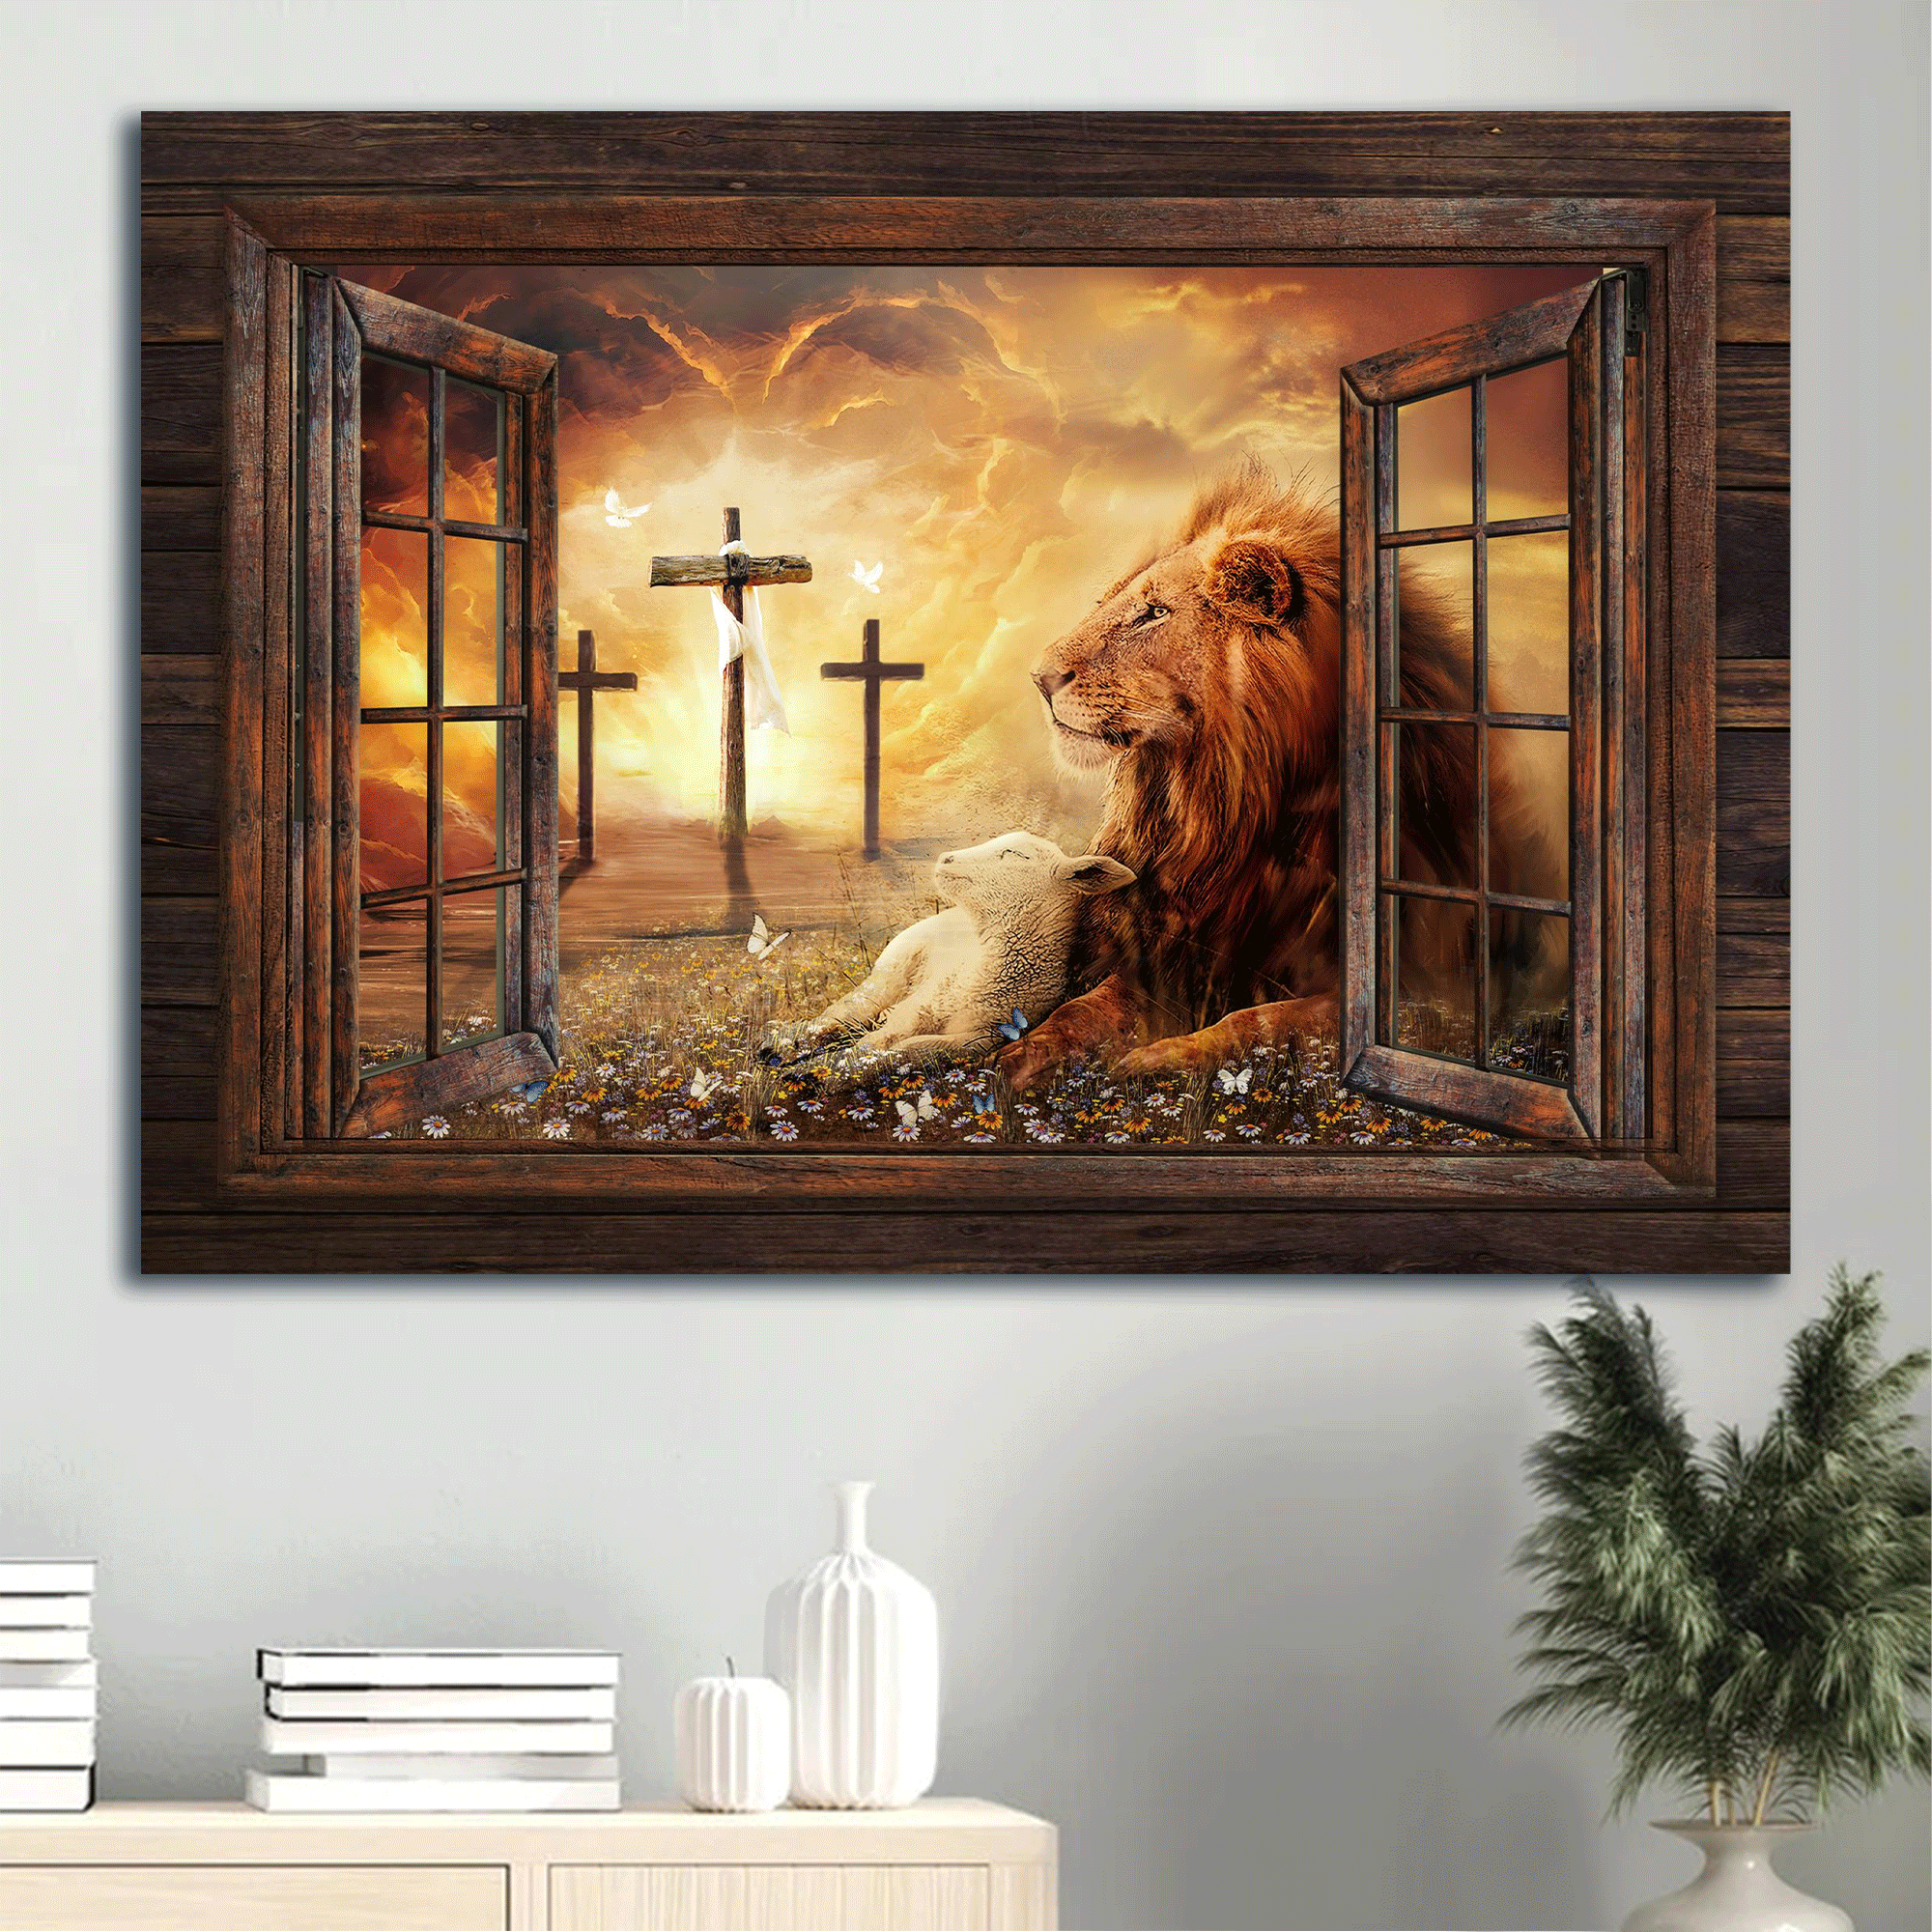 Jesus Landscape Canvas - Lion of Judah, Lamb of God, Three rugged crosses, On a peaceful day Landscape Canvas - Gift For Christian Landscape Canvas